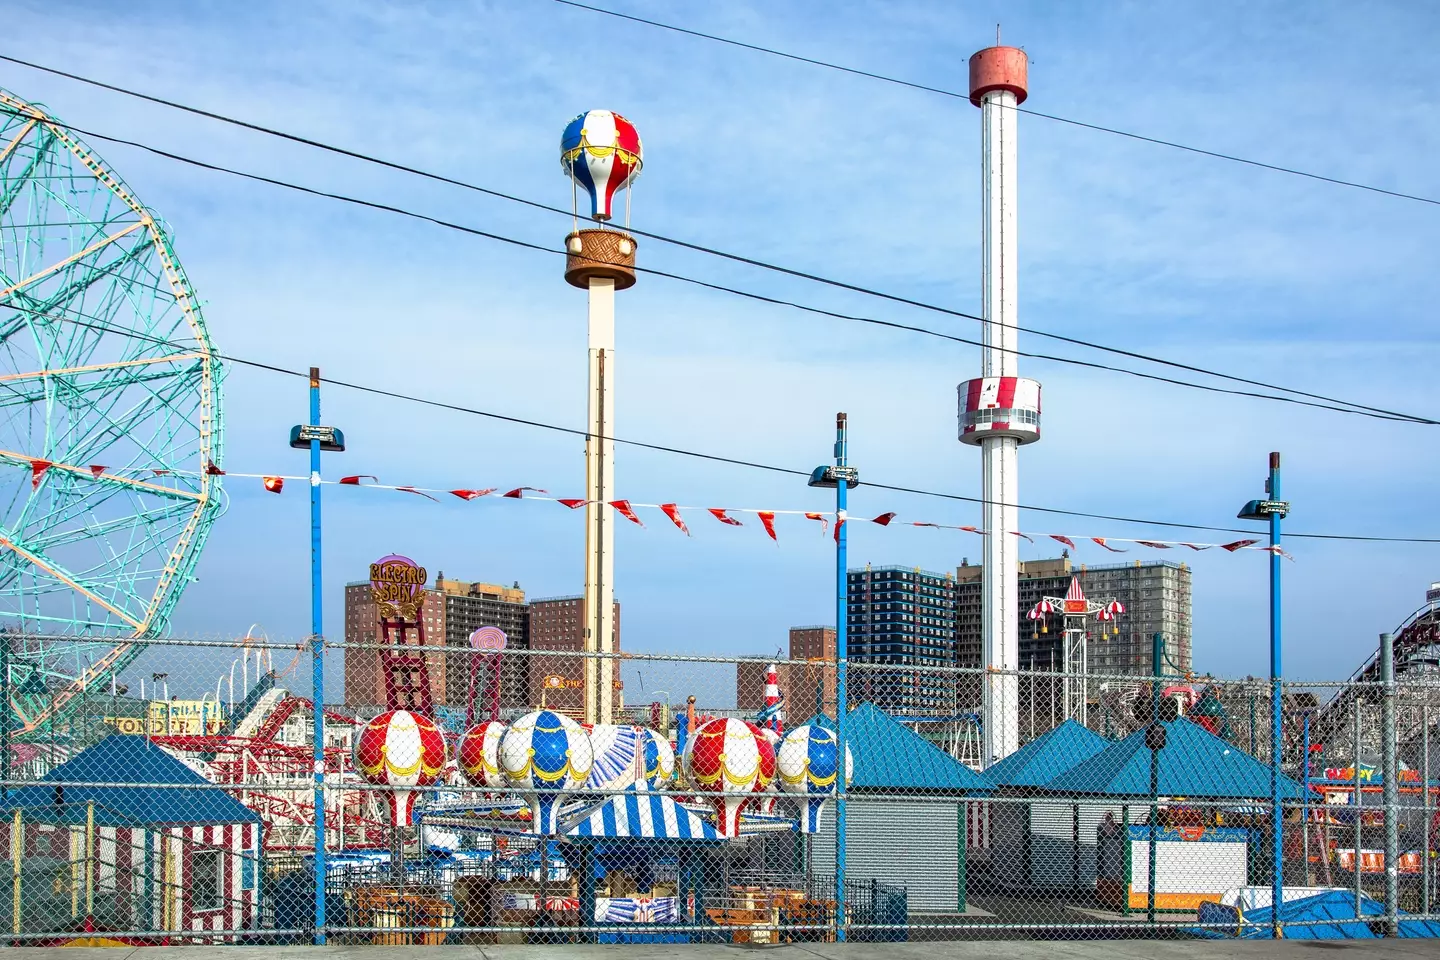 Coney Island amusement park is still going strong today.